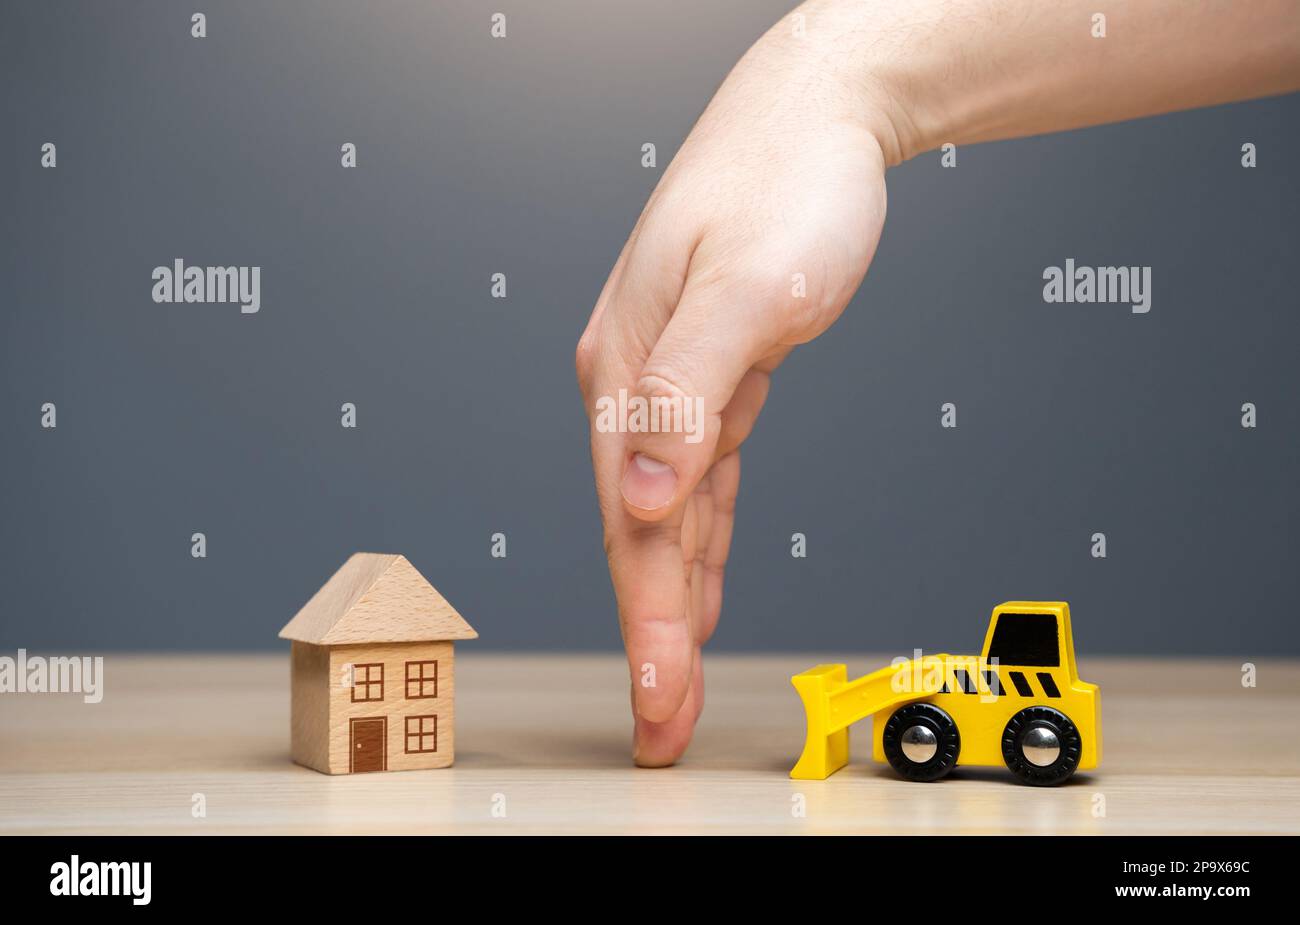 Stop house demolition. Protection of private property from destruction. Conflict between homeowners and developers. Claims and courts. Protection of t Stock Photo